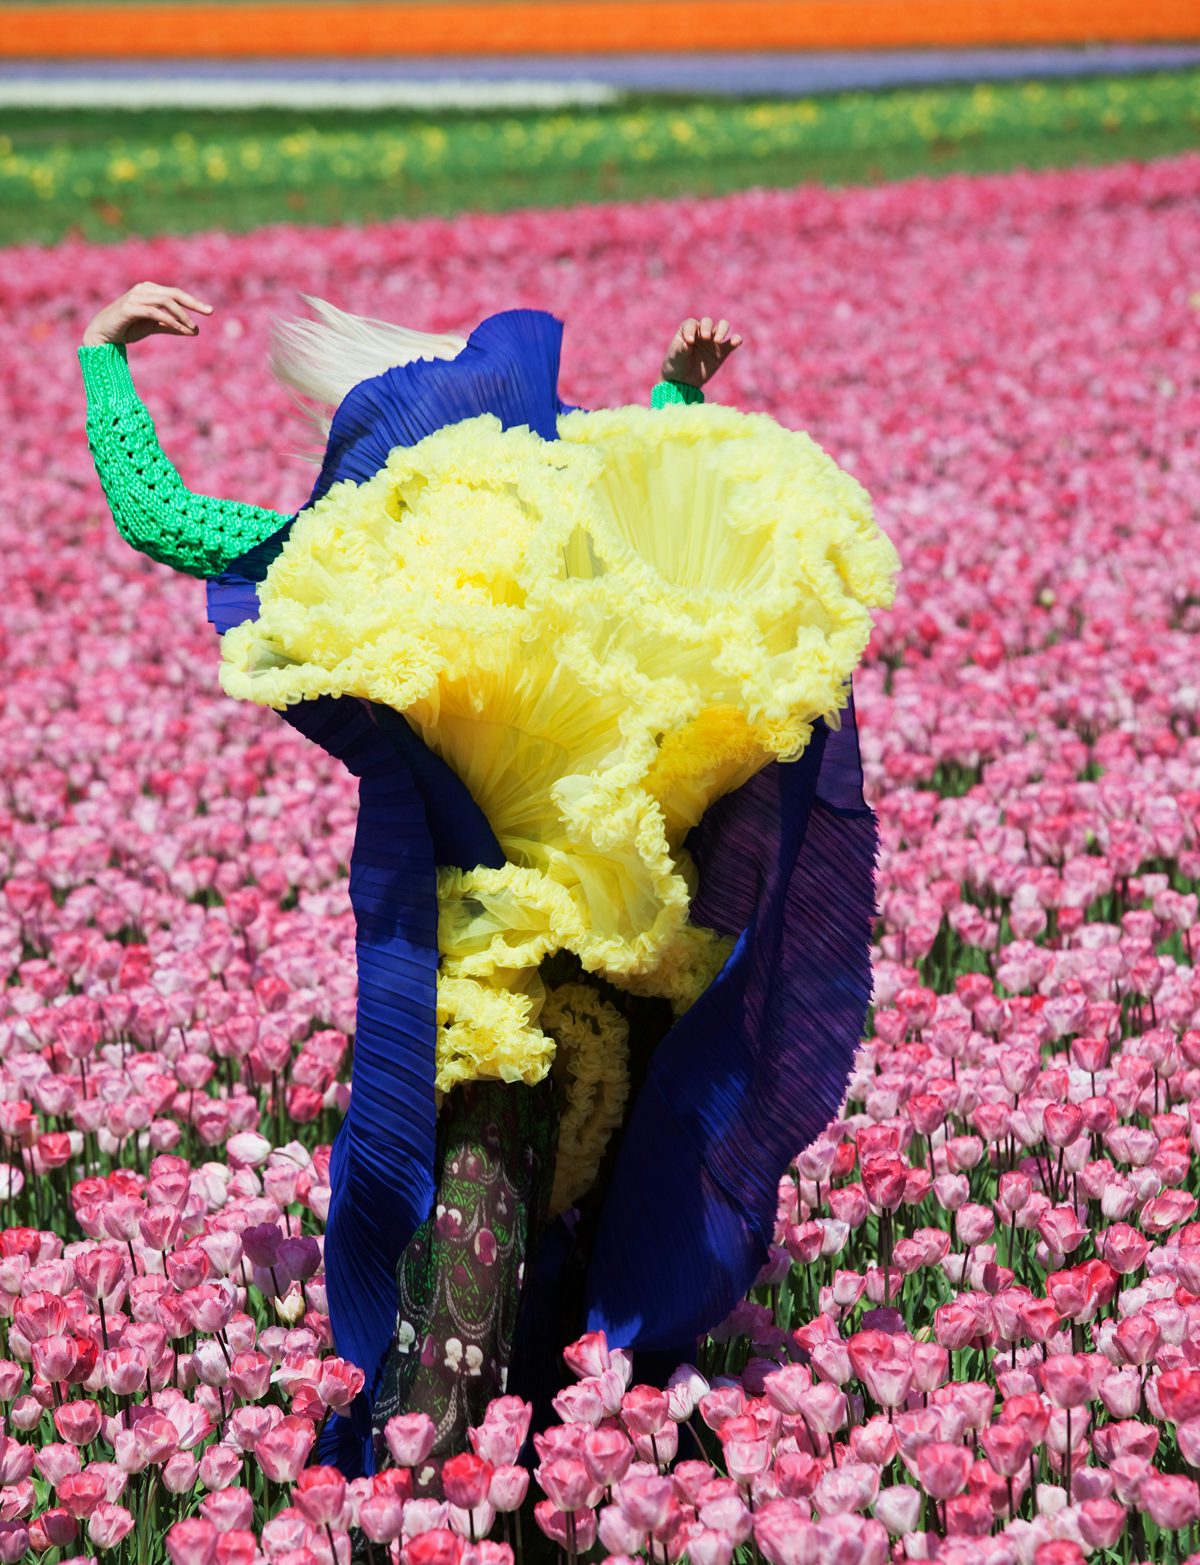 Viviane Sassen Photography Introduced Through Her New Project UMBRA in  Paris